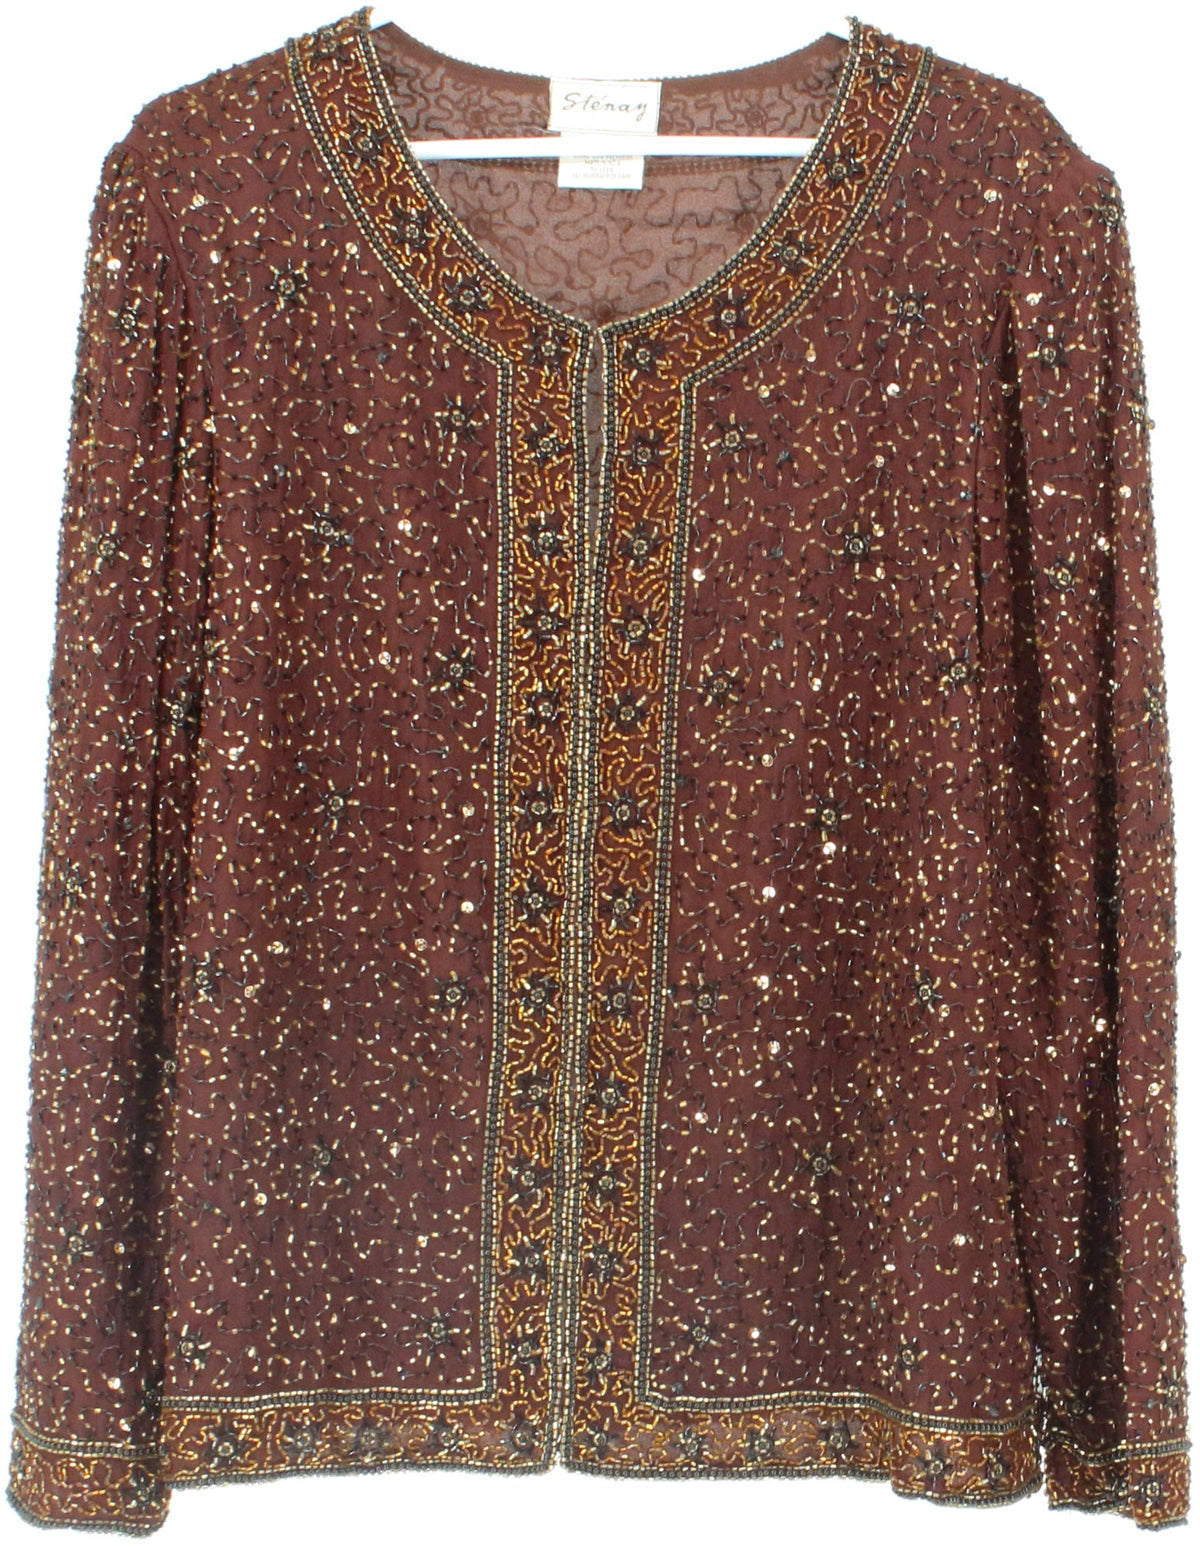 Stenay Brown Embroidered Long Sleeve Top